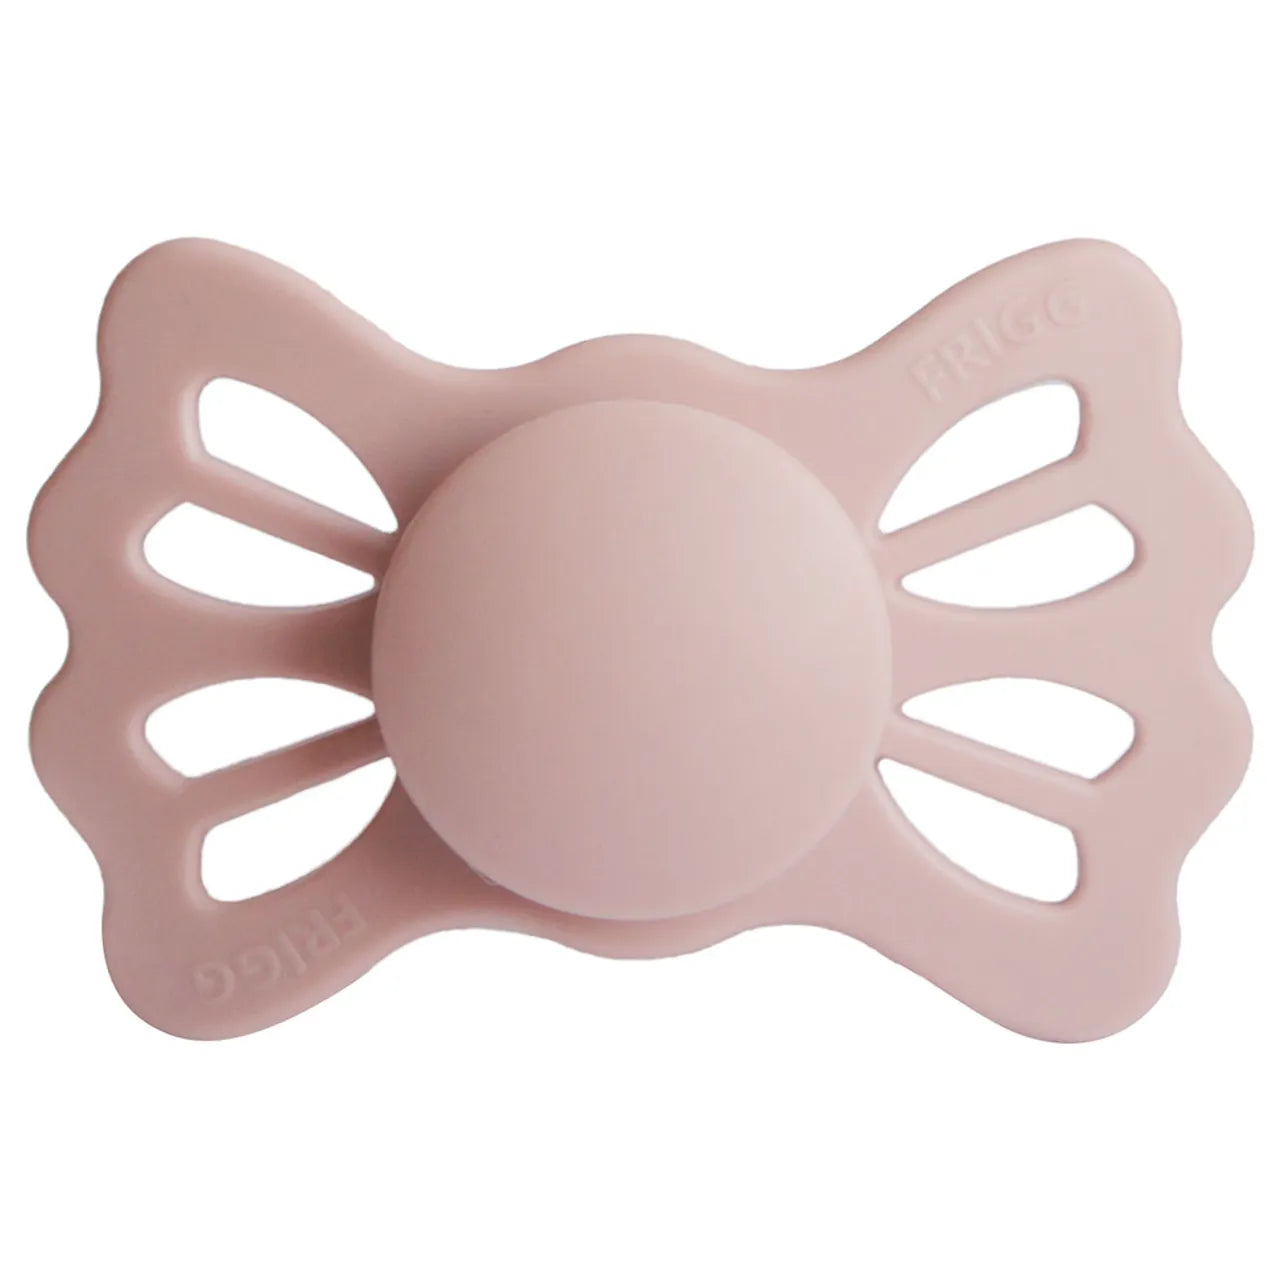 Frigg Lucky Symmetrical Silicone Baby Pacifier 6M-18M, Blush - Size 2 - Laadlee